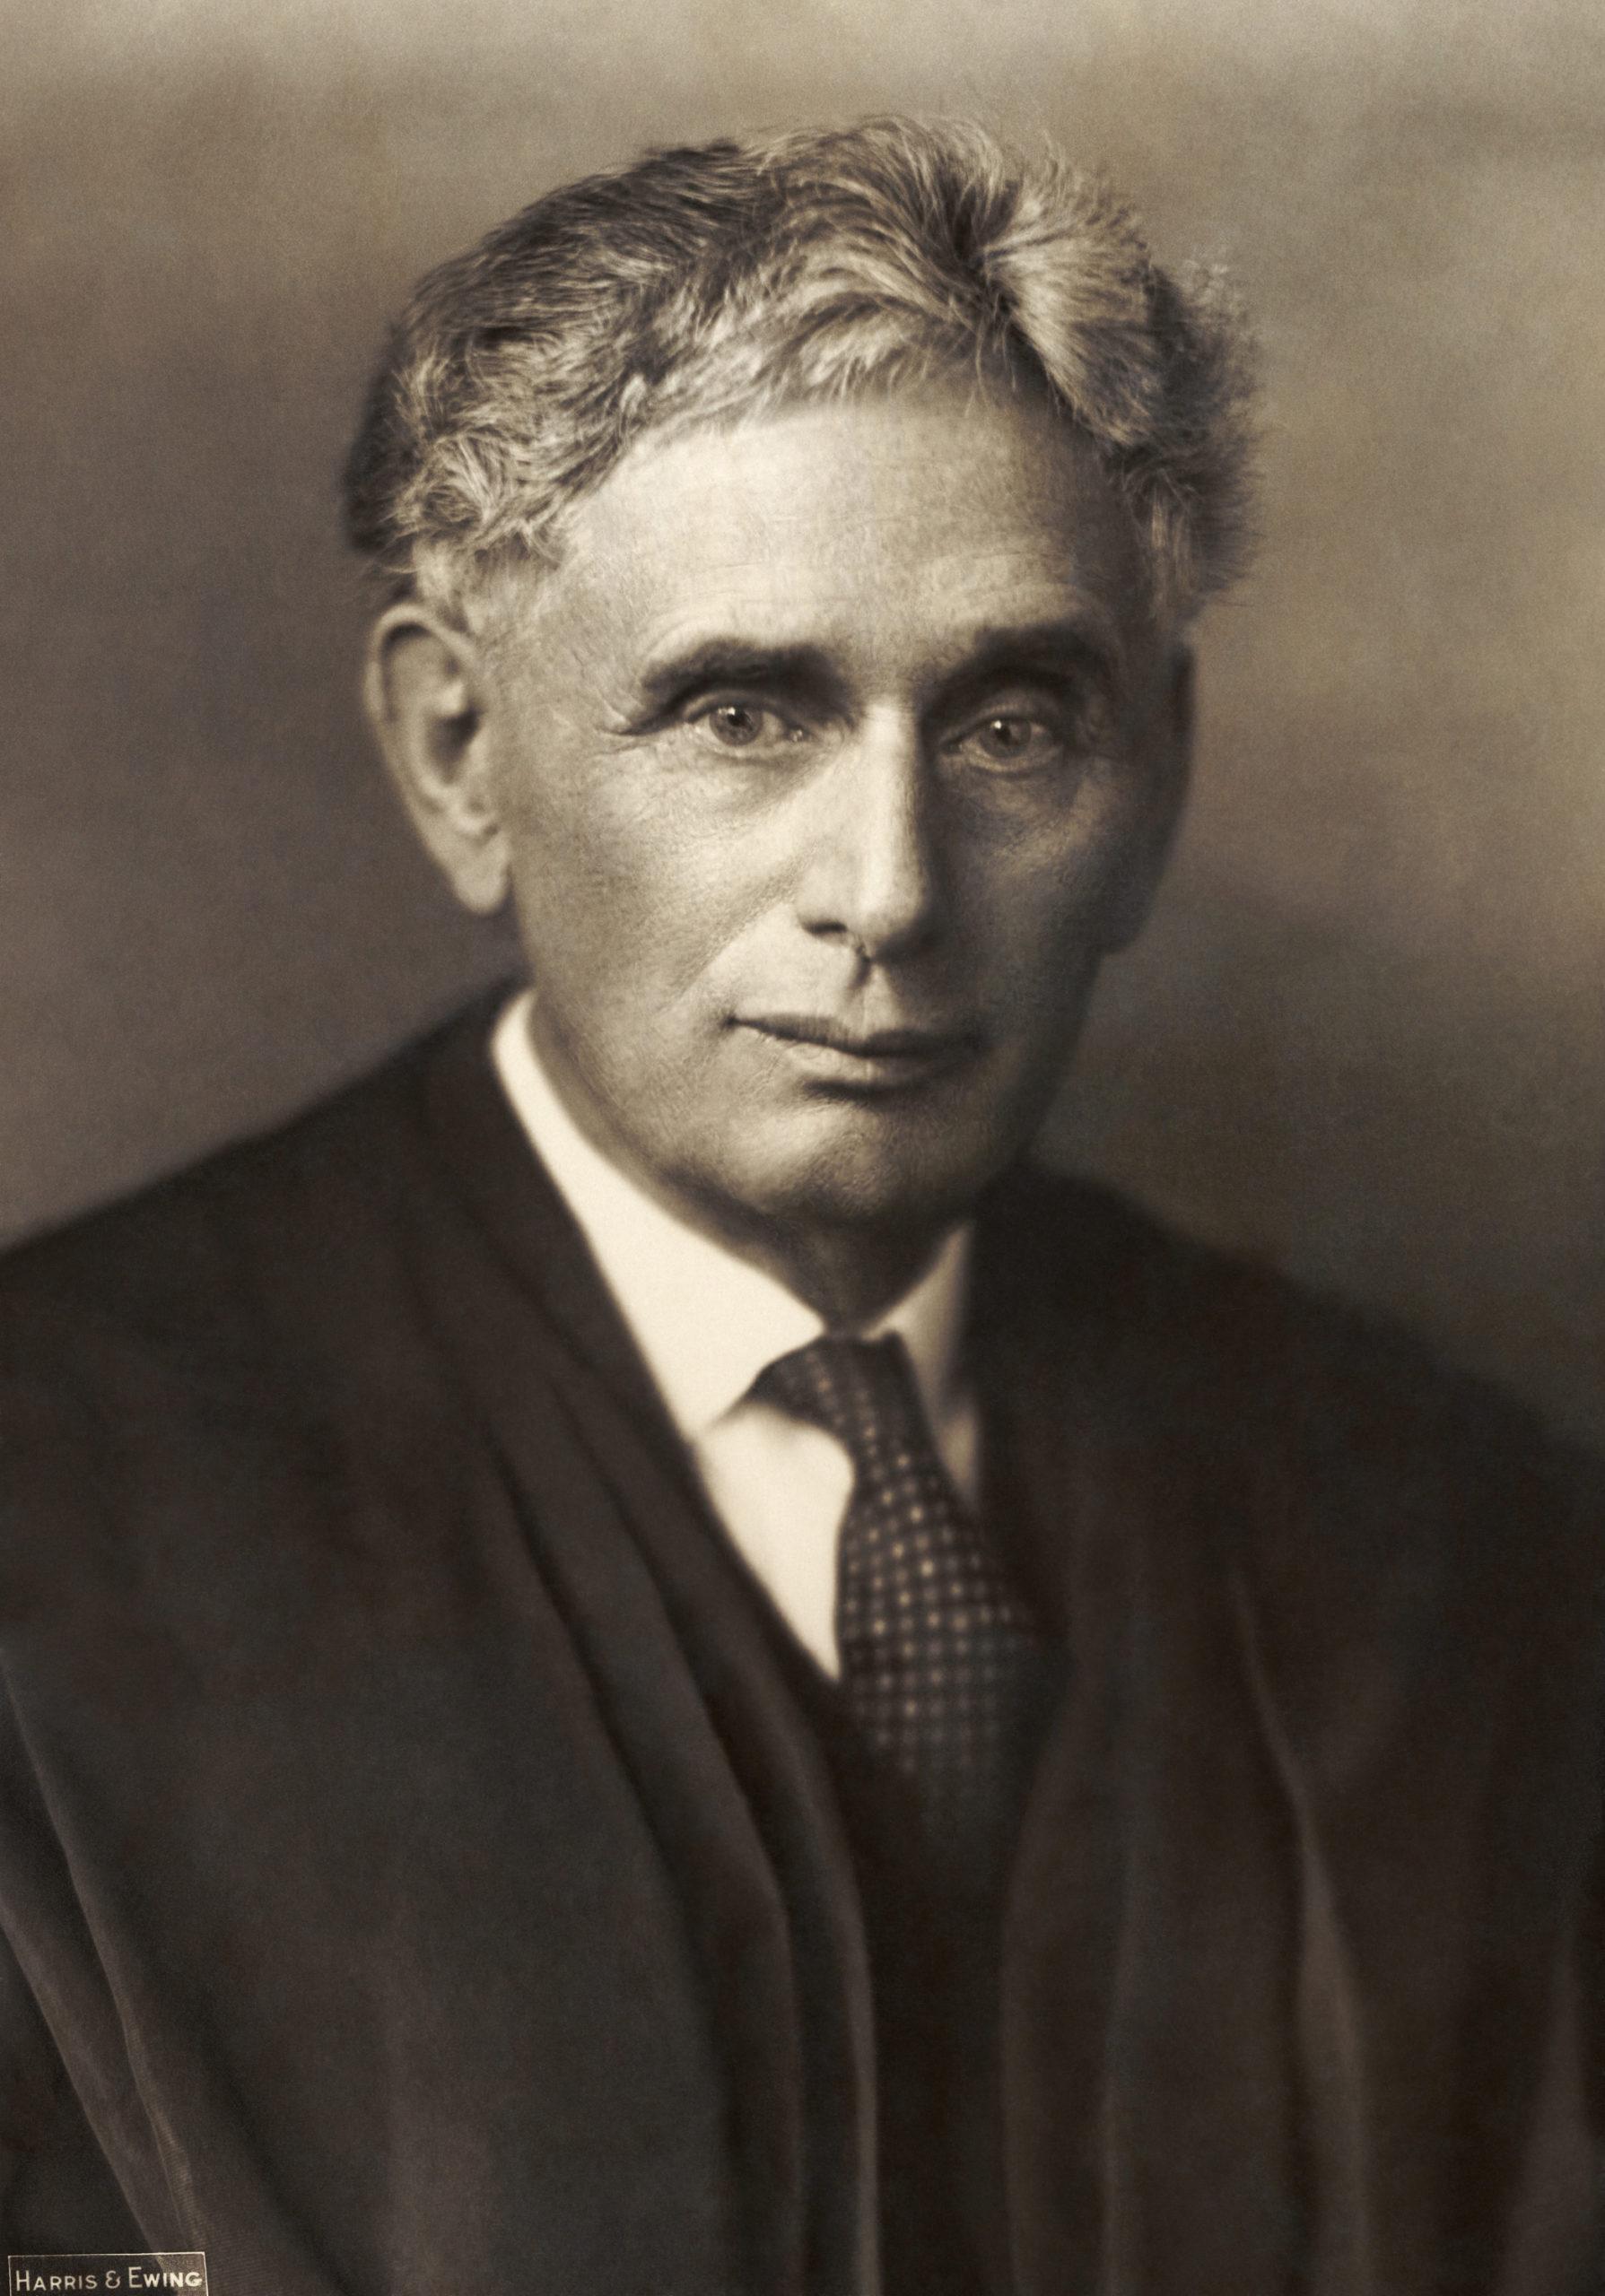 Buy Louis D. Brandeis: A Life Book Online at Low Prices in India